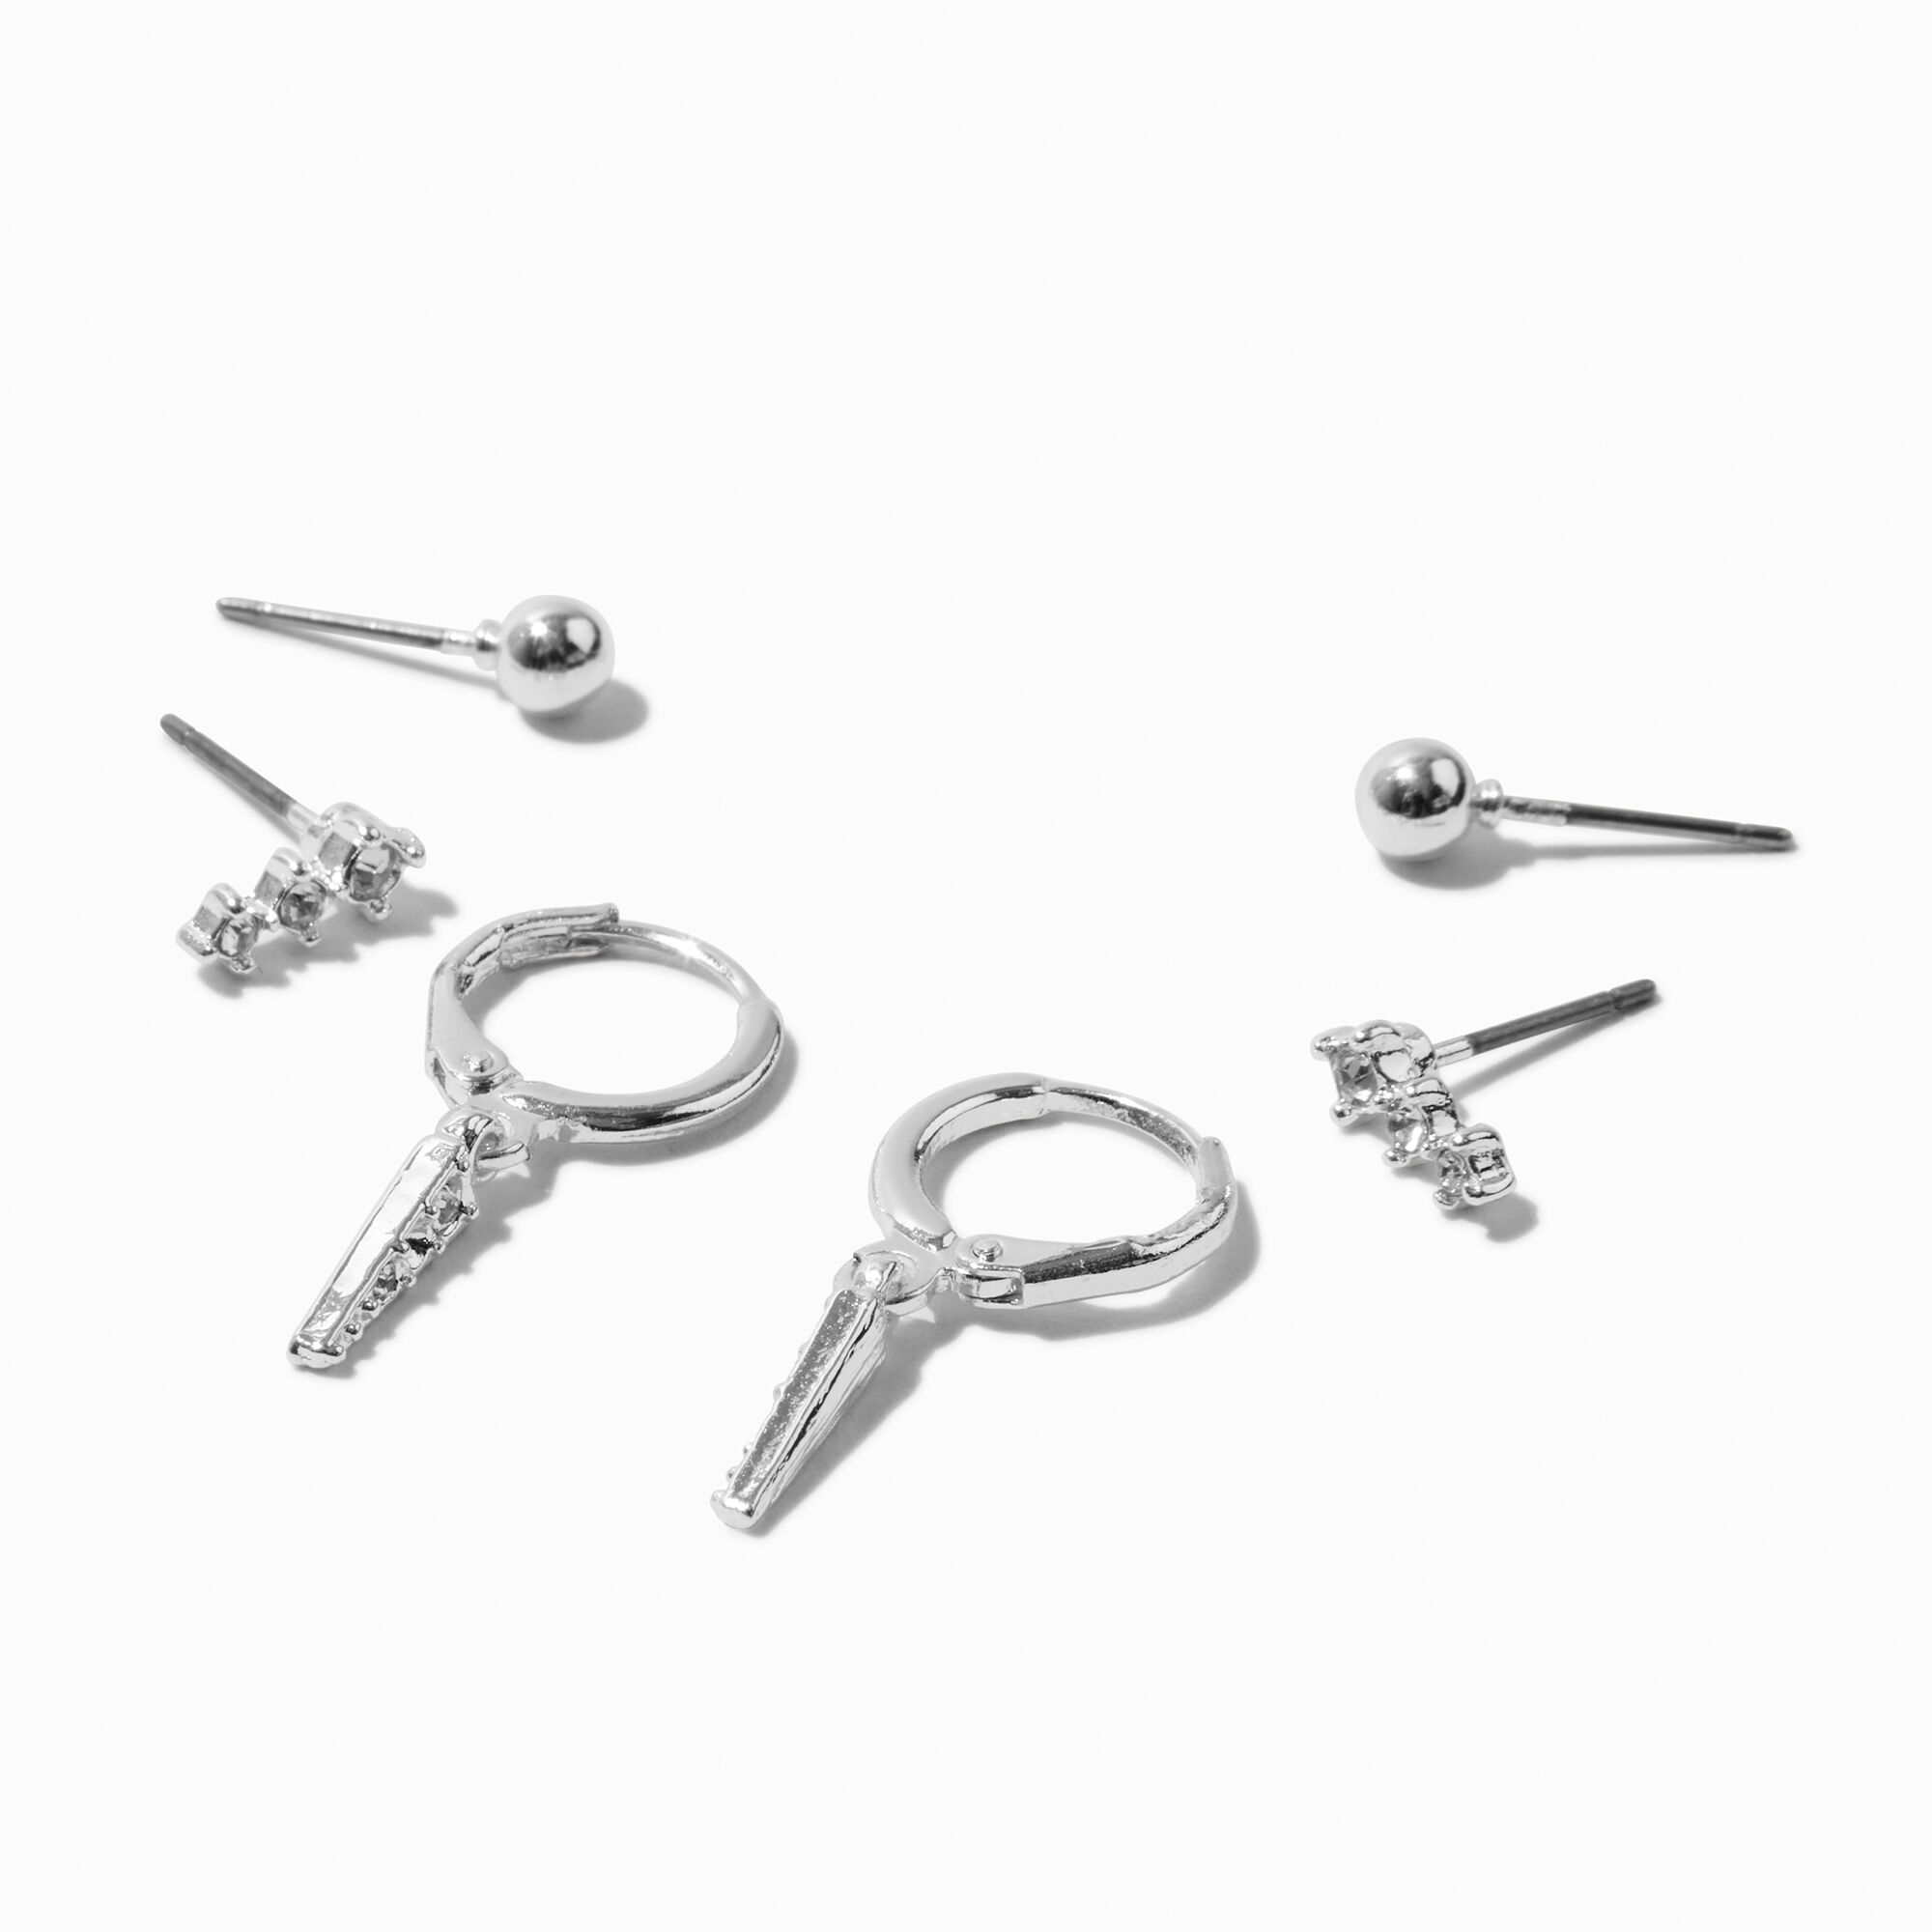 View Claires Tone Embellished Spike Earring Stackables Set 3 Pack Silver information